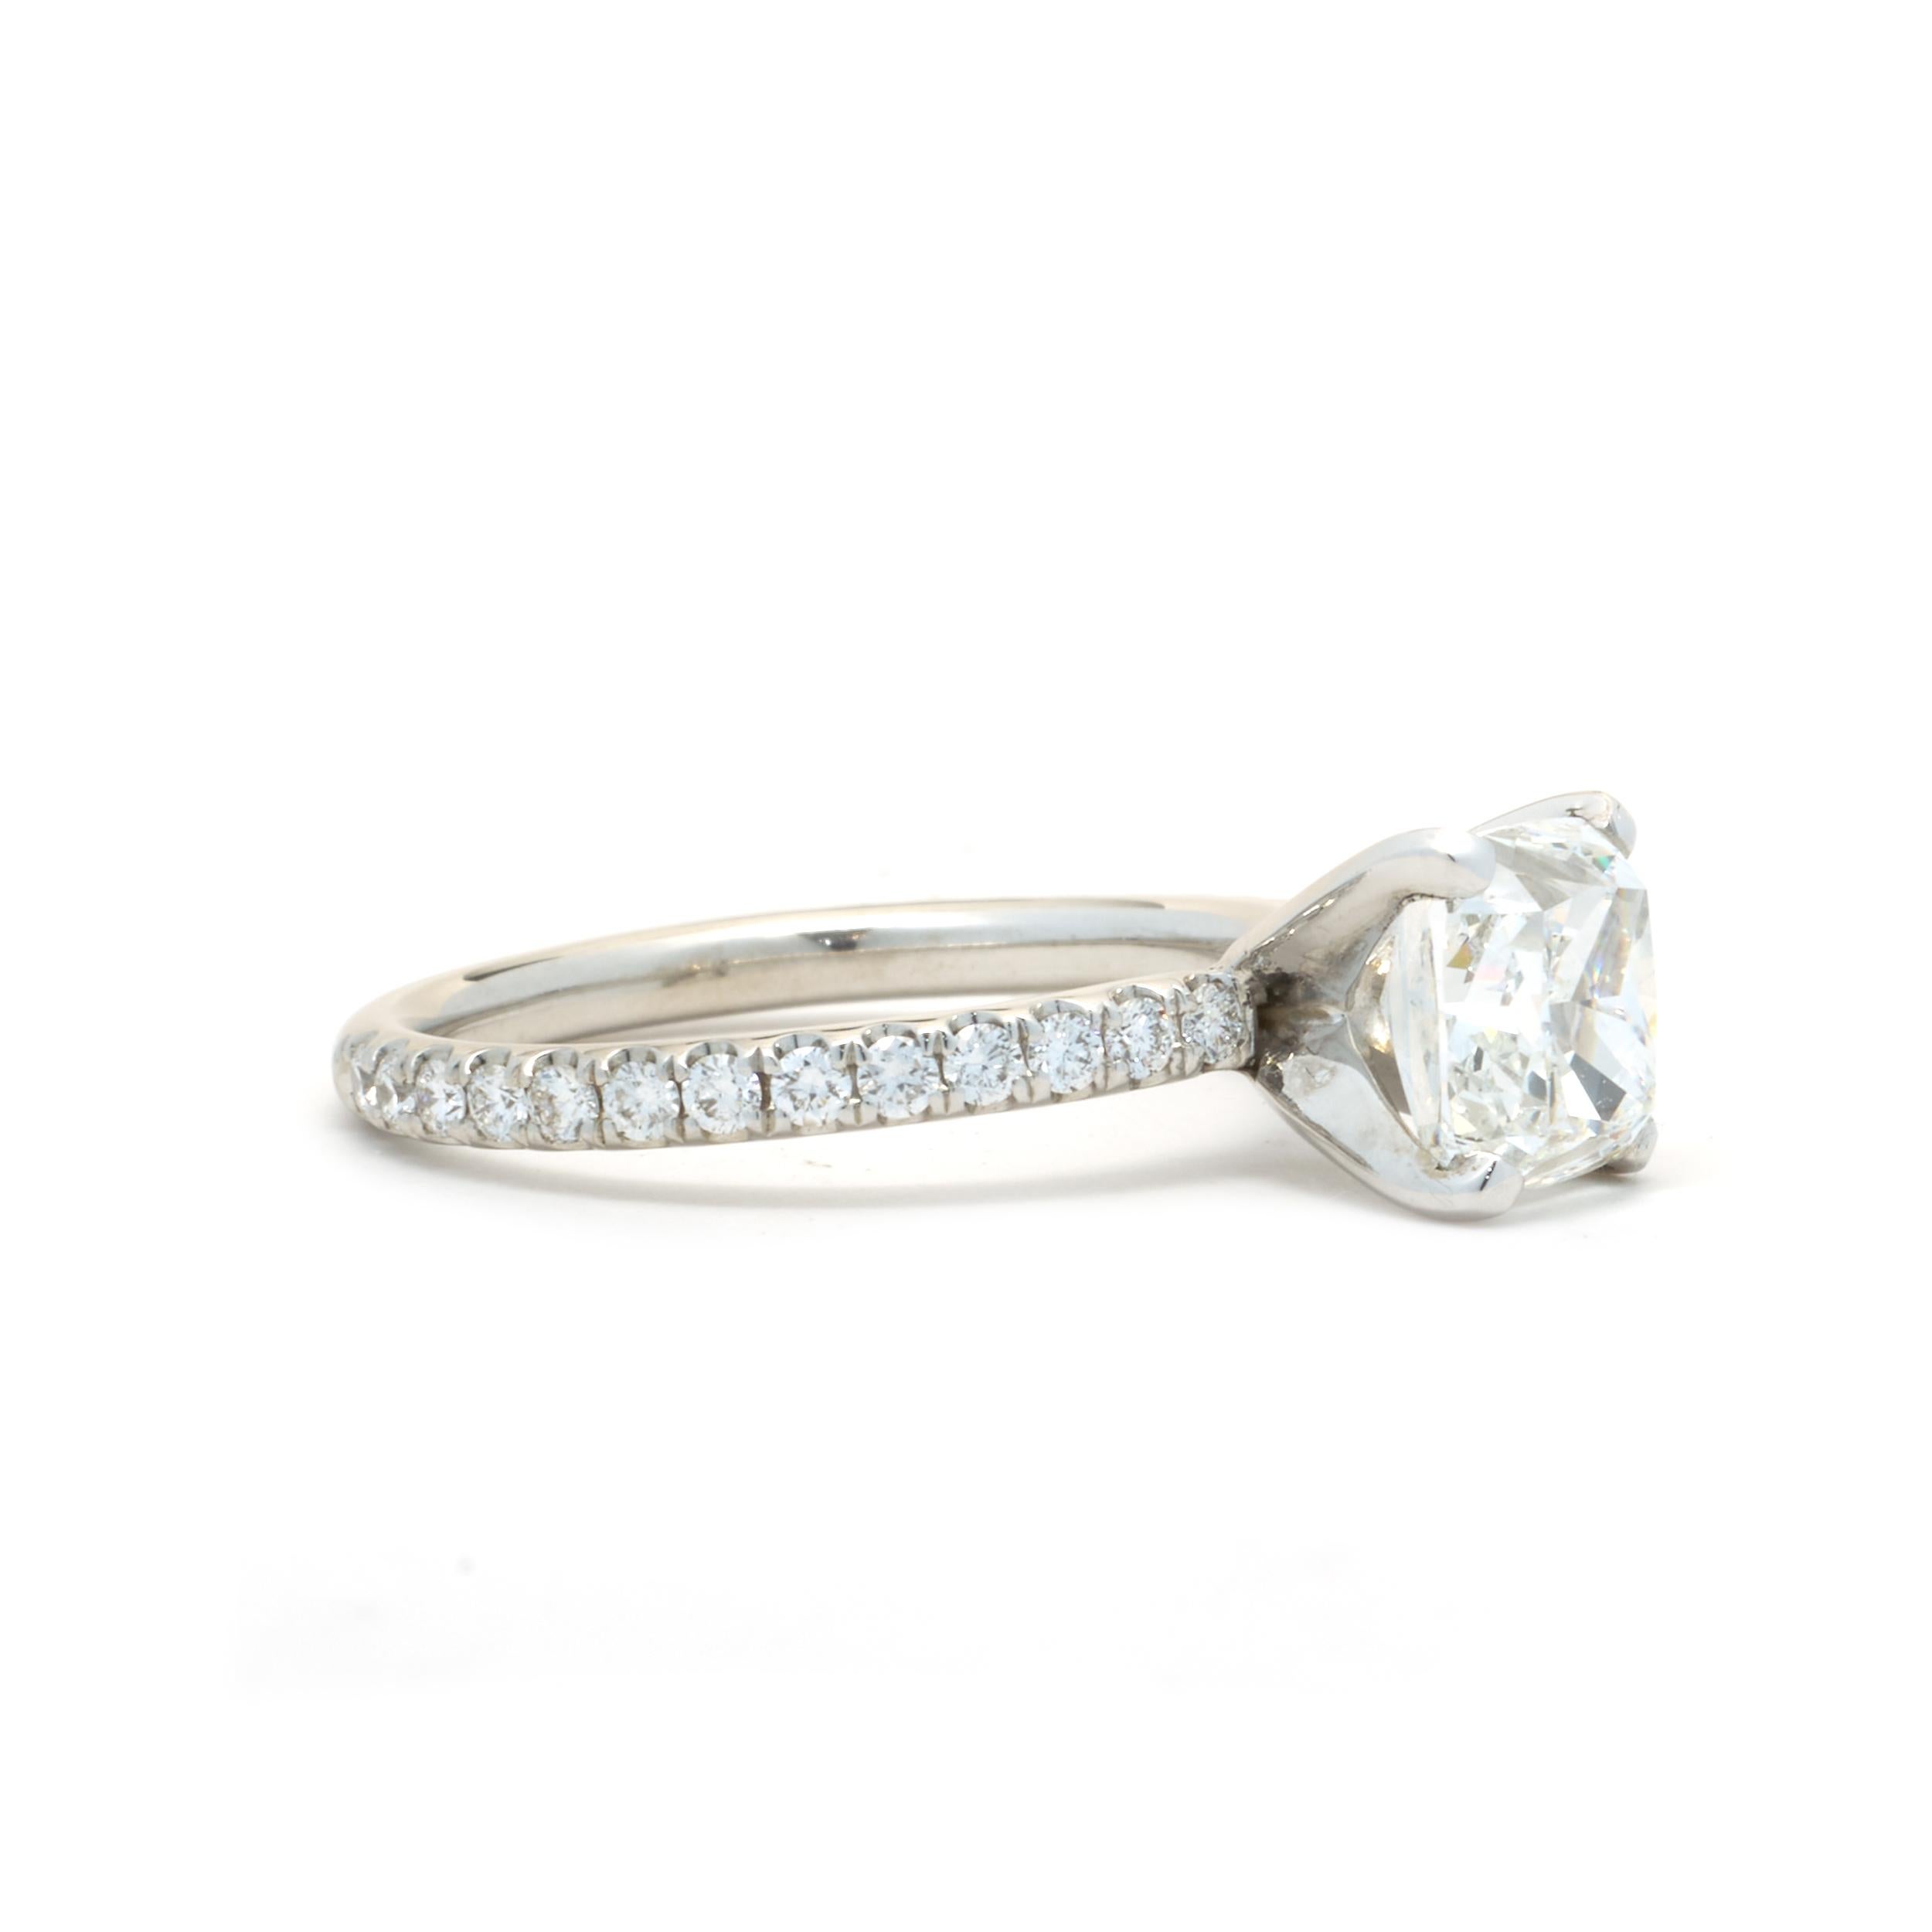 Designer: custom
Material: 14K white gold
Diamond: 1 cushion cut = 2.01ct 
Color: G
Clarity: VVS1
GIA 2151456249
Diamond: 26 round cut = .52cttw
Color: G
Clarity: VS1
Ring Size: 6.75 (please allow up to 2 additional business days for sizing